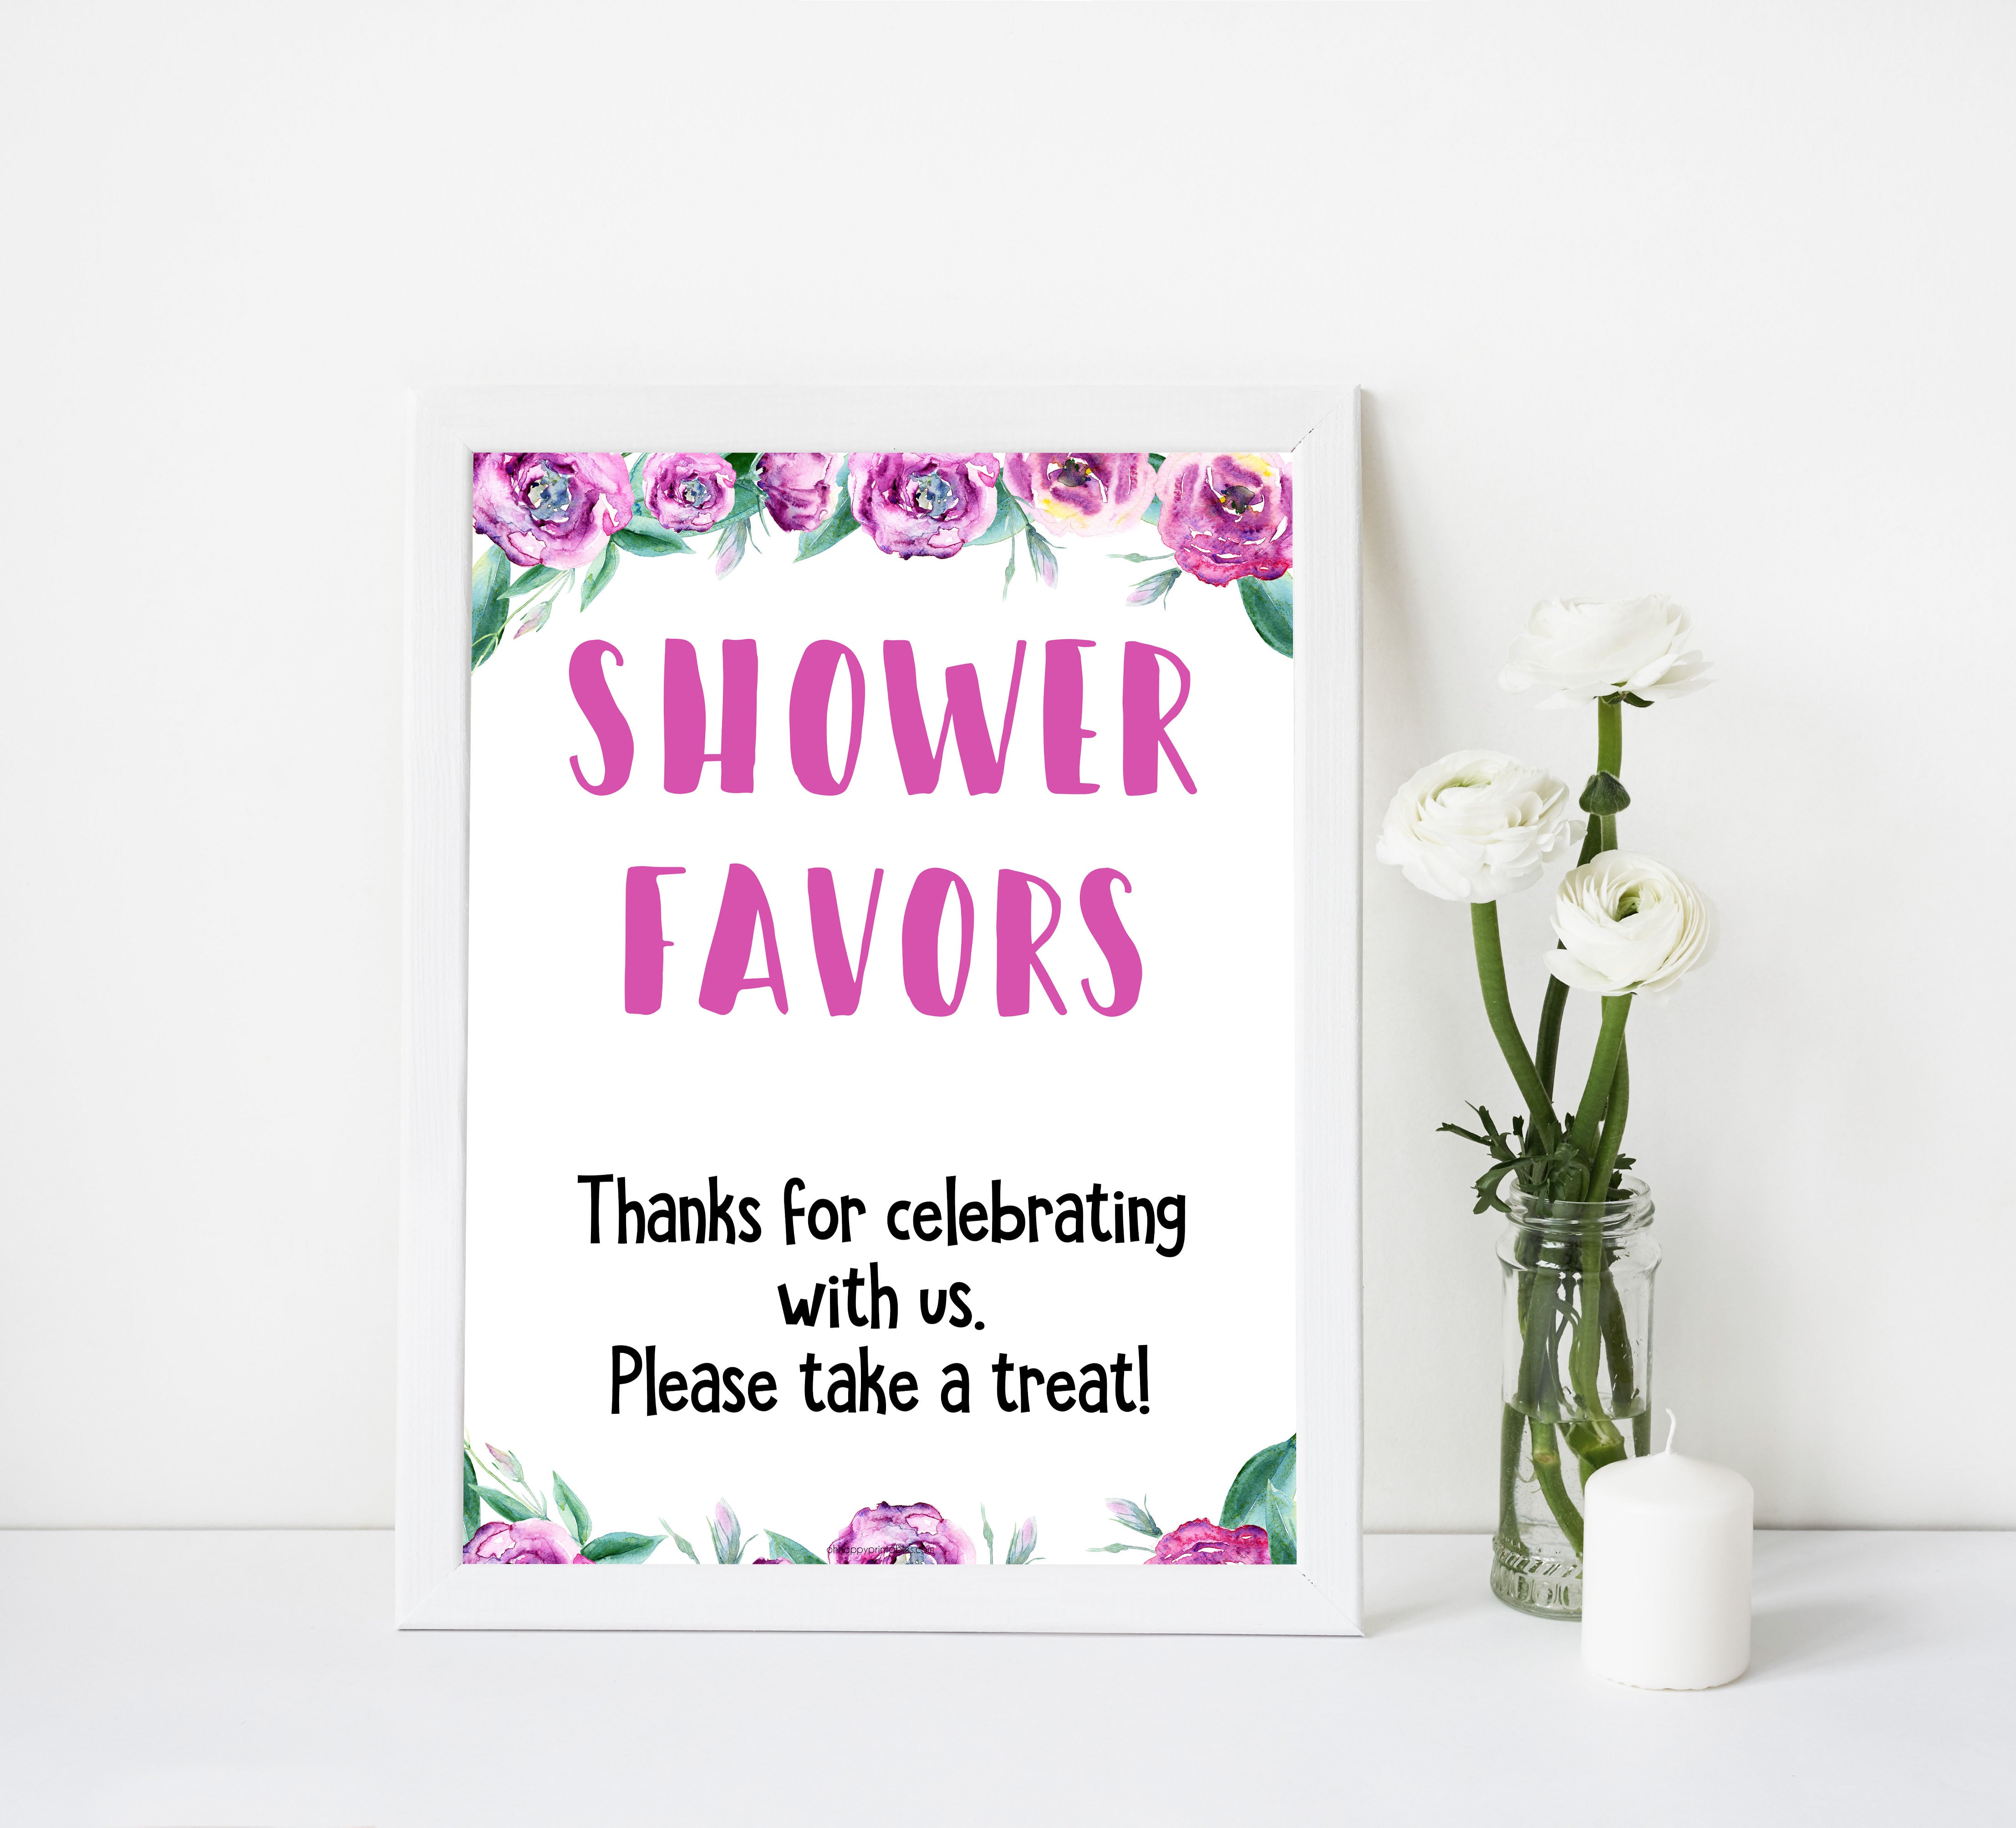 baby shower favors signs, baby favors printable decor, printable baby shower decor, fun baby shower ideas, purple peonies baby shower